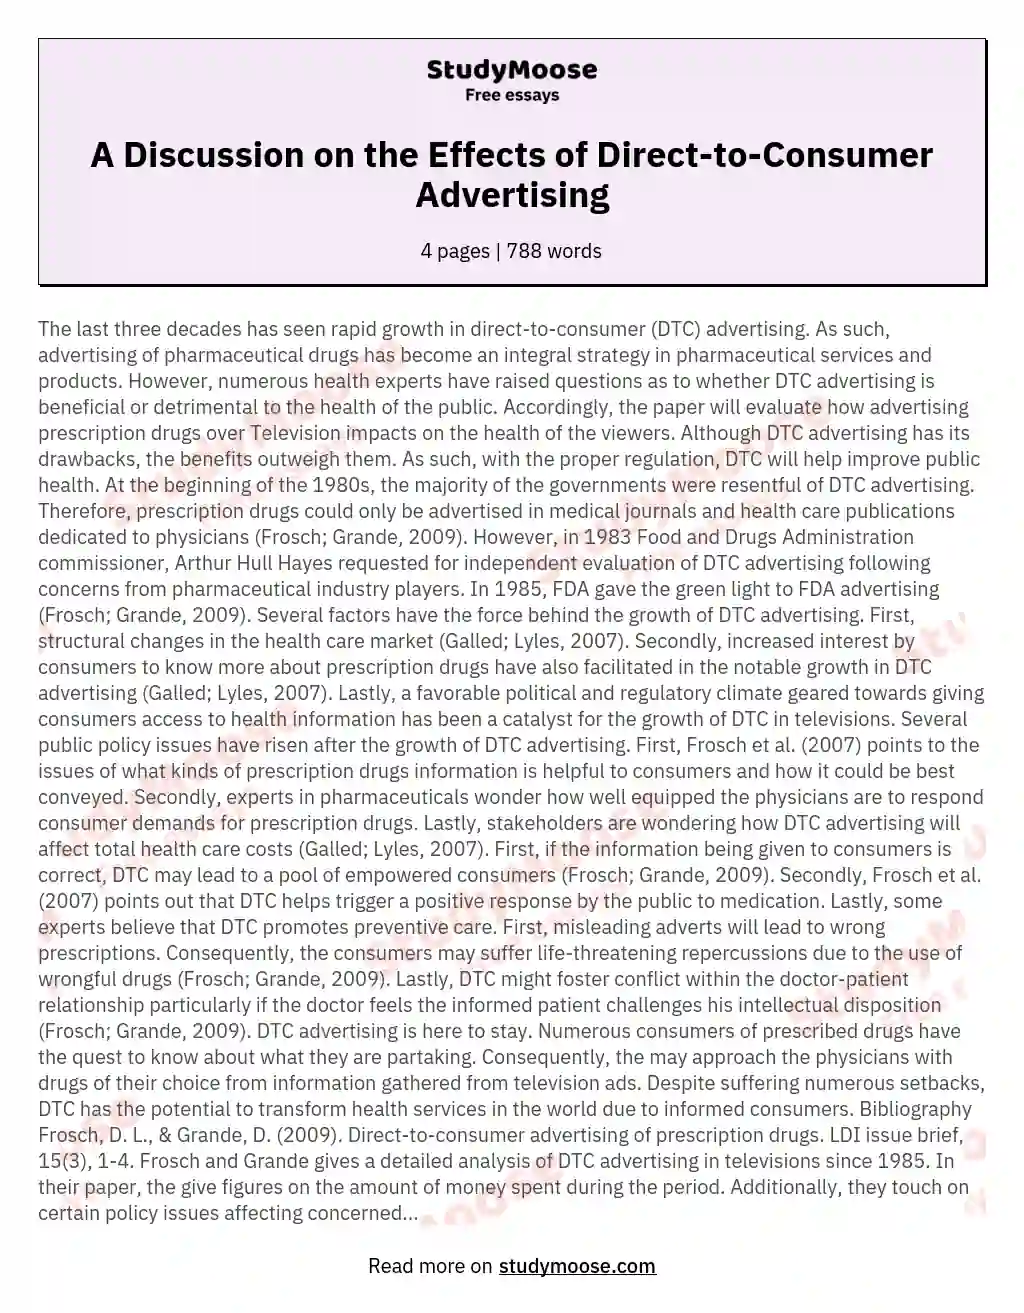 A Discussion on the Effects of Direct-to-Consumer Advertising essay